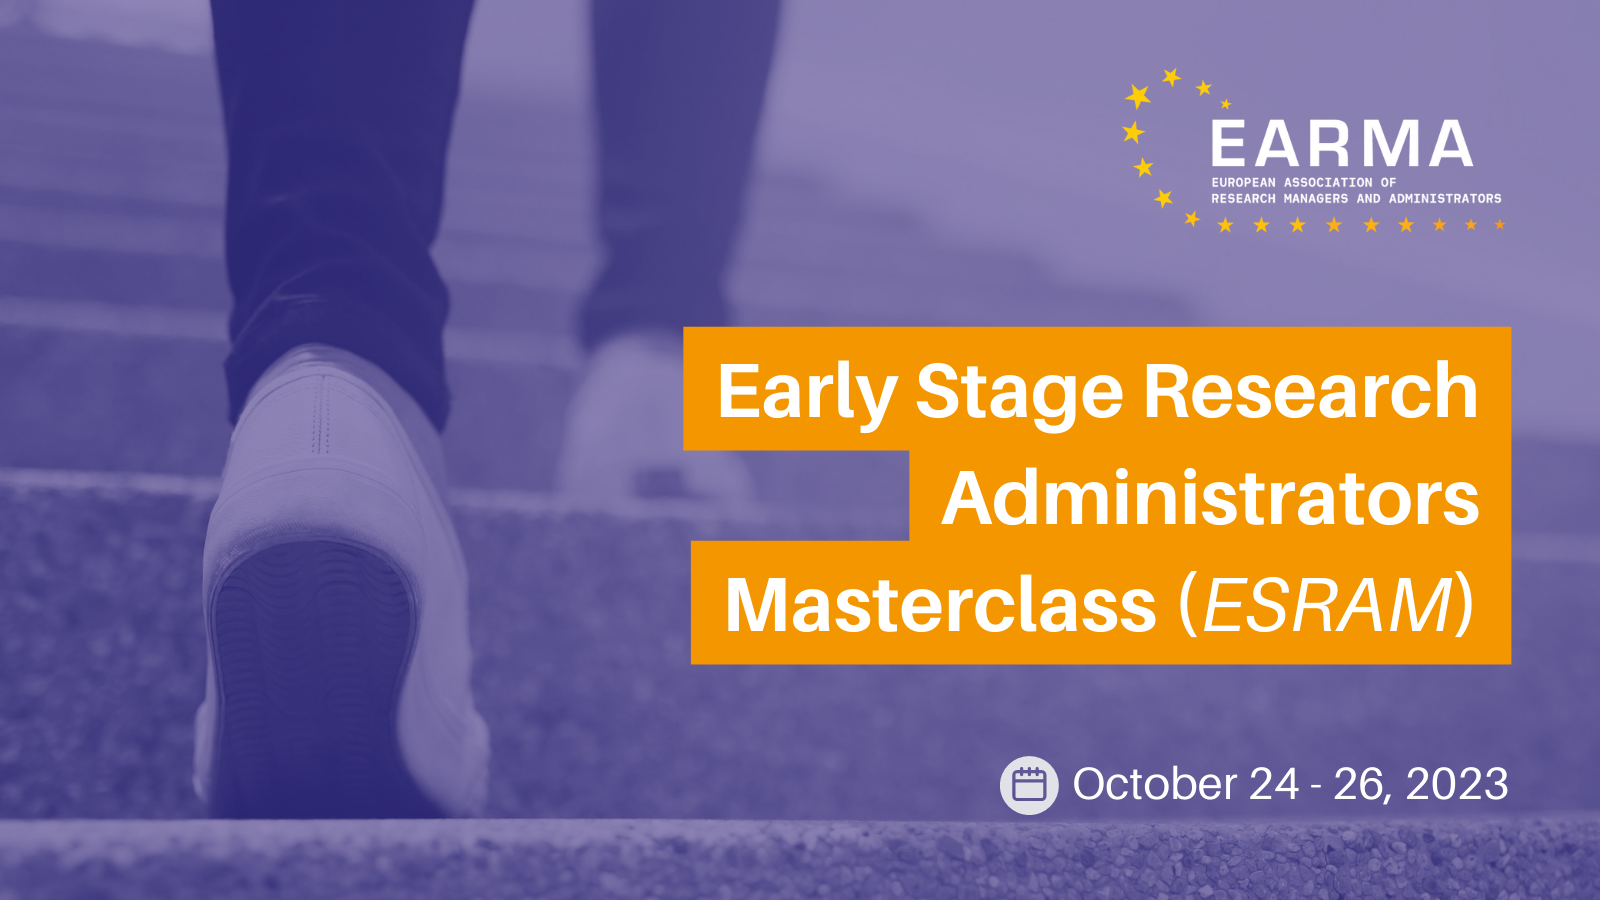 EARMA Early Stage Research Administrator Masterclass (ESRAM)